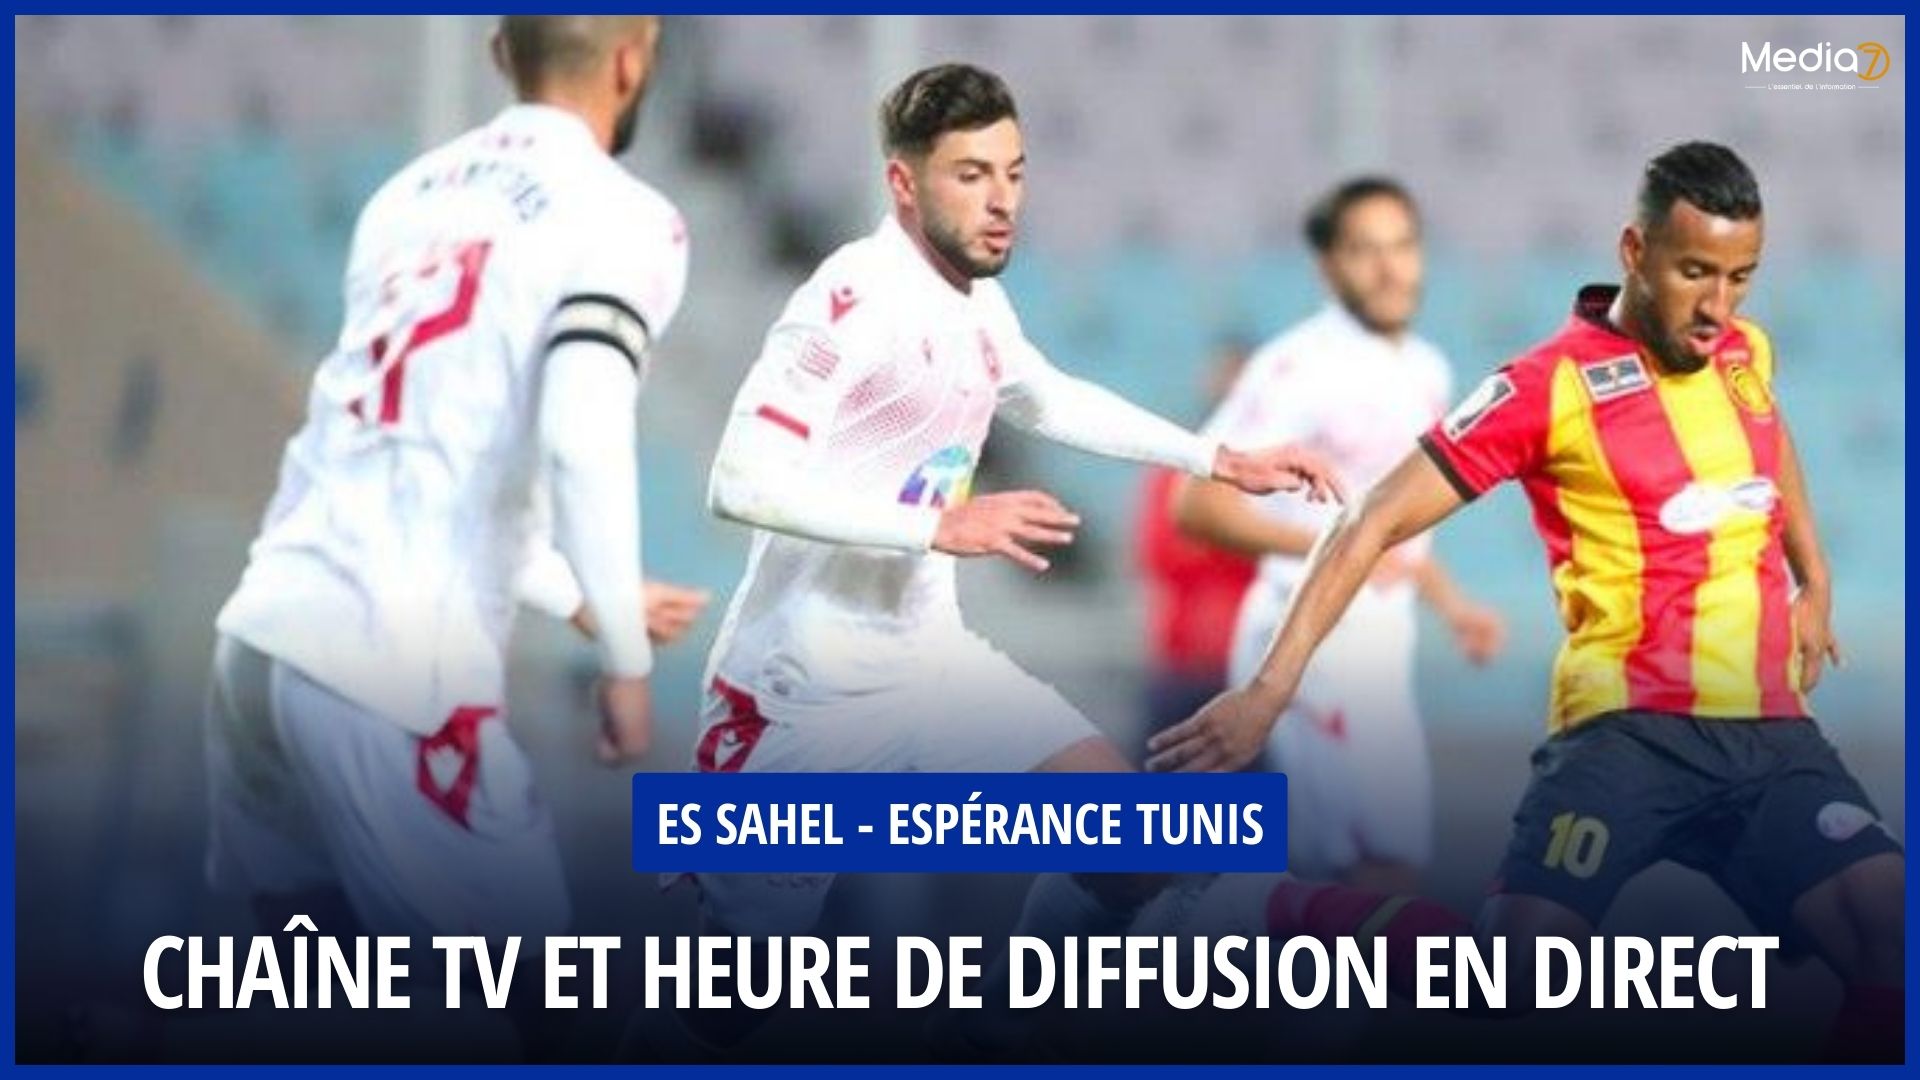 Match ES Sahel - Espérance Tunis live: television broadcast and schedule - Media7